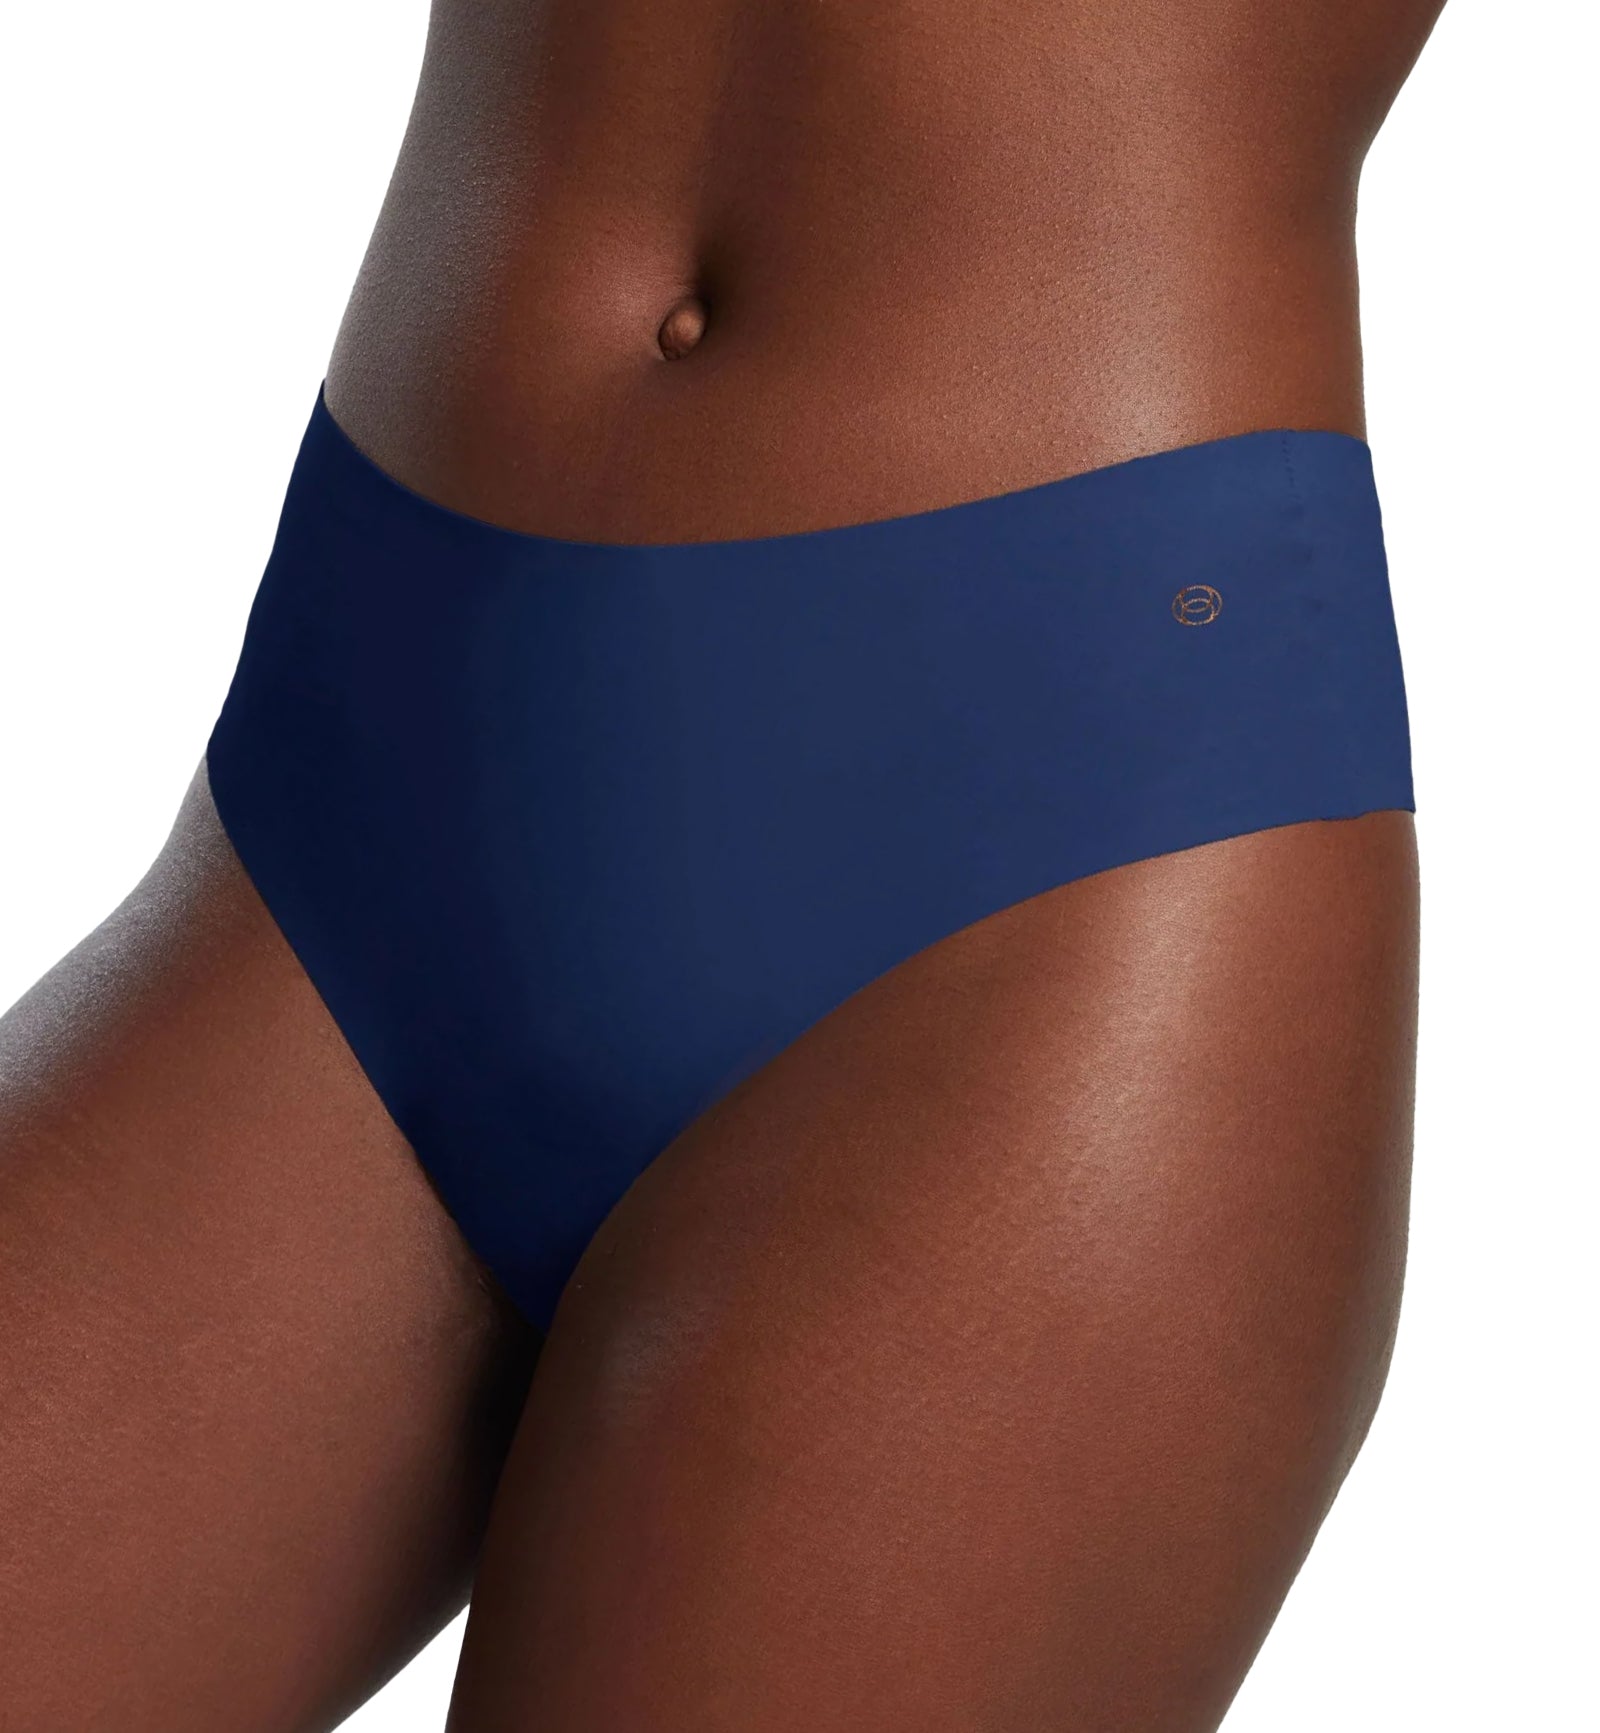 Evelyn & Bobbie High-Waisted Thong (1703),US 0-14,Midnight Navy - Midnight Navy,US 0 - 14